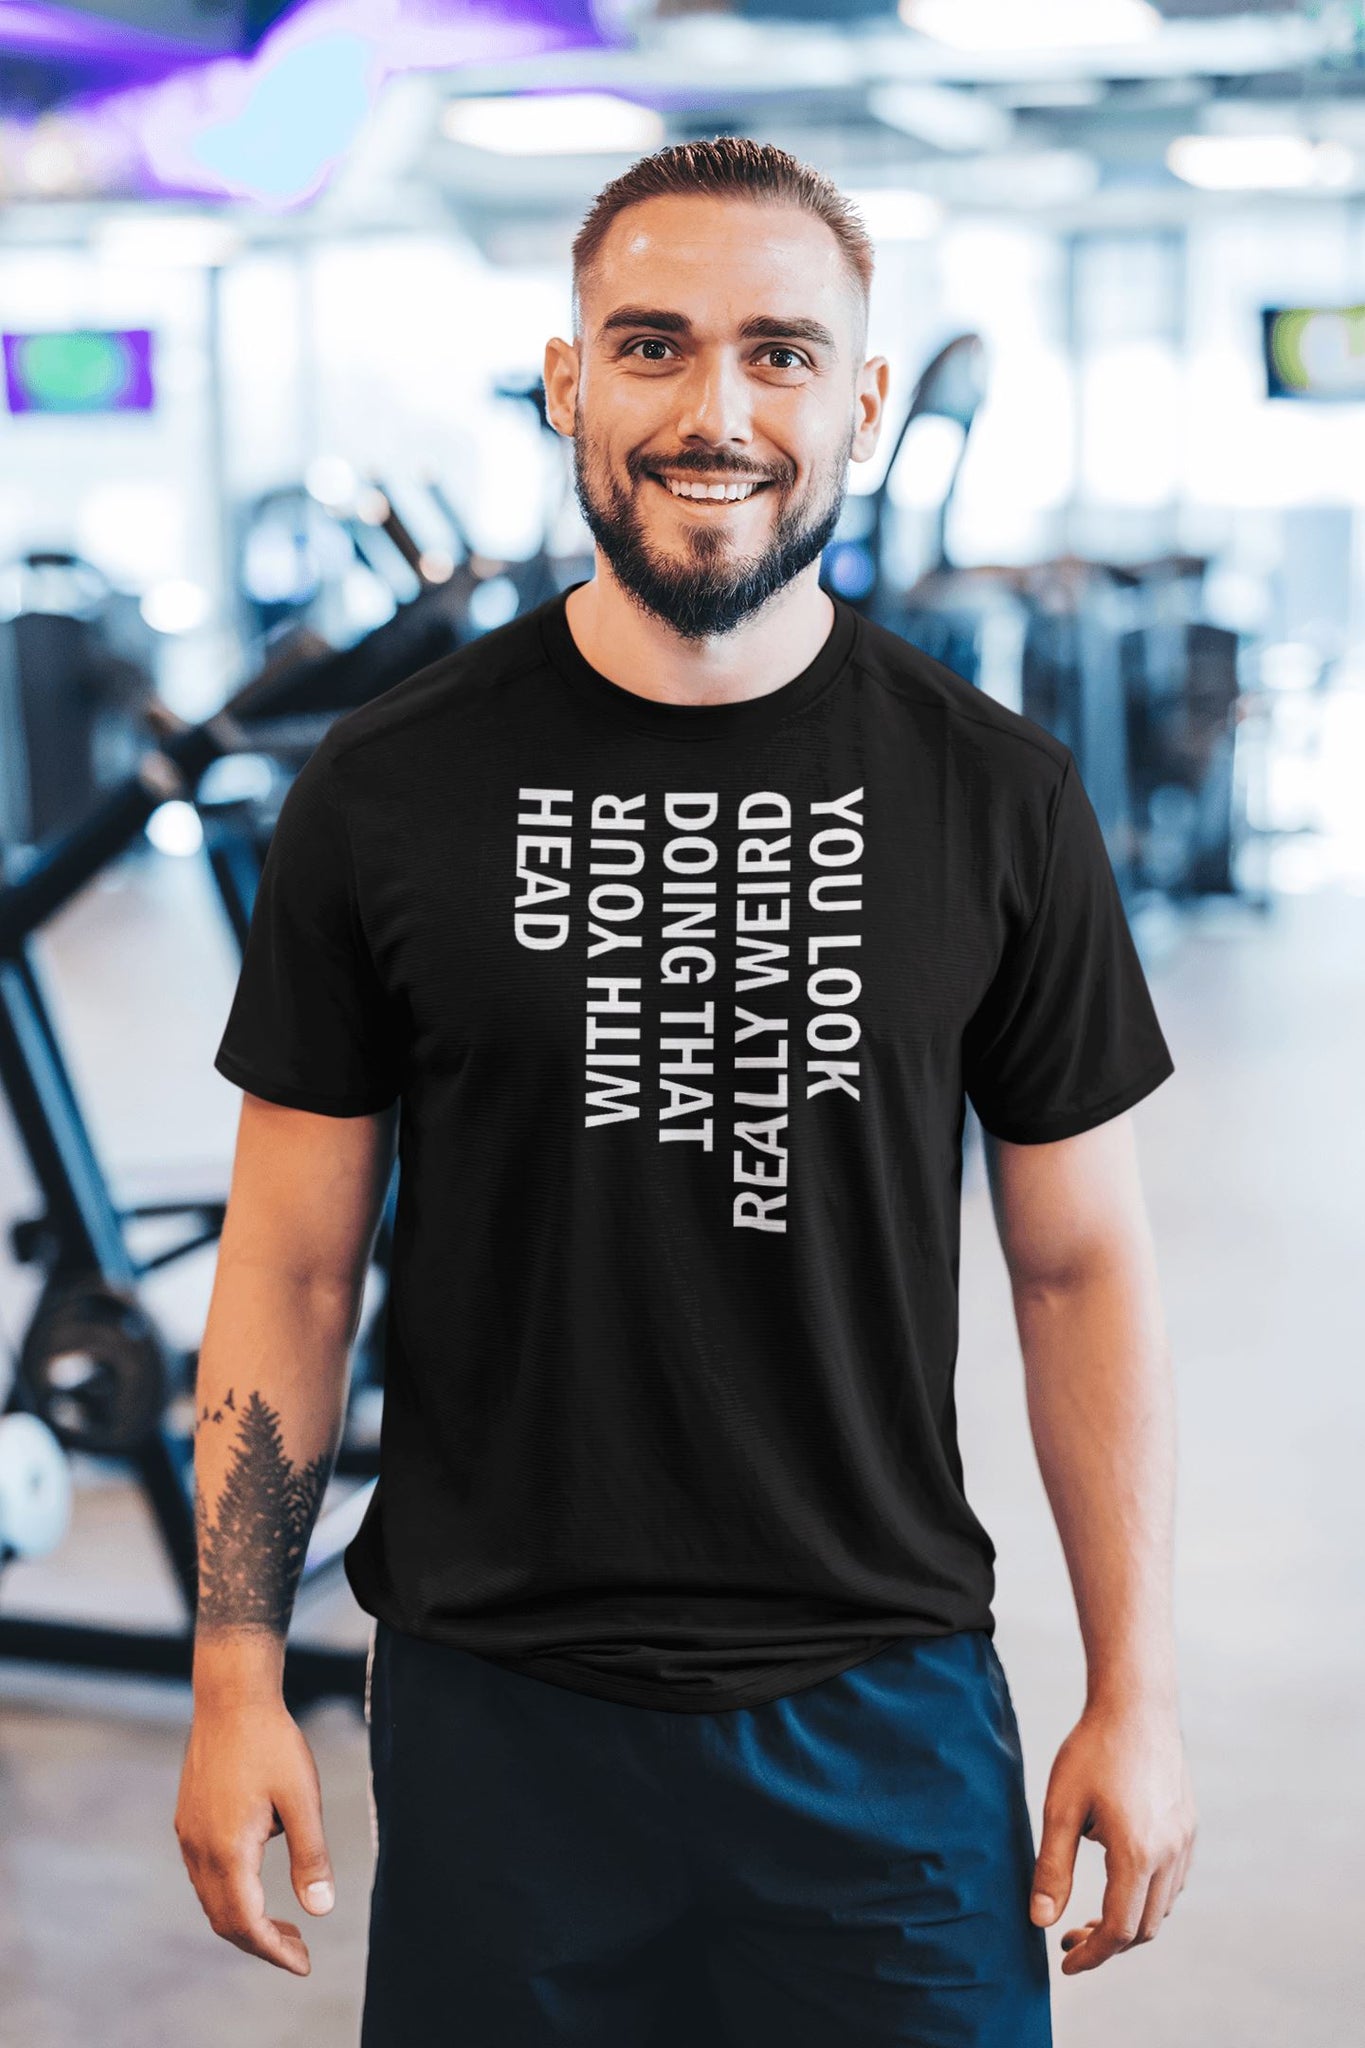 You Look Really Weird Doing That With Your Head Exclusive Funny T Shirt for Men and Women - Catch My Drift India  black, clothing, female, funny, general, gym, made in india, optical illusion